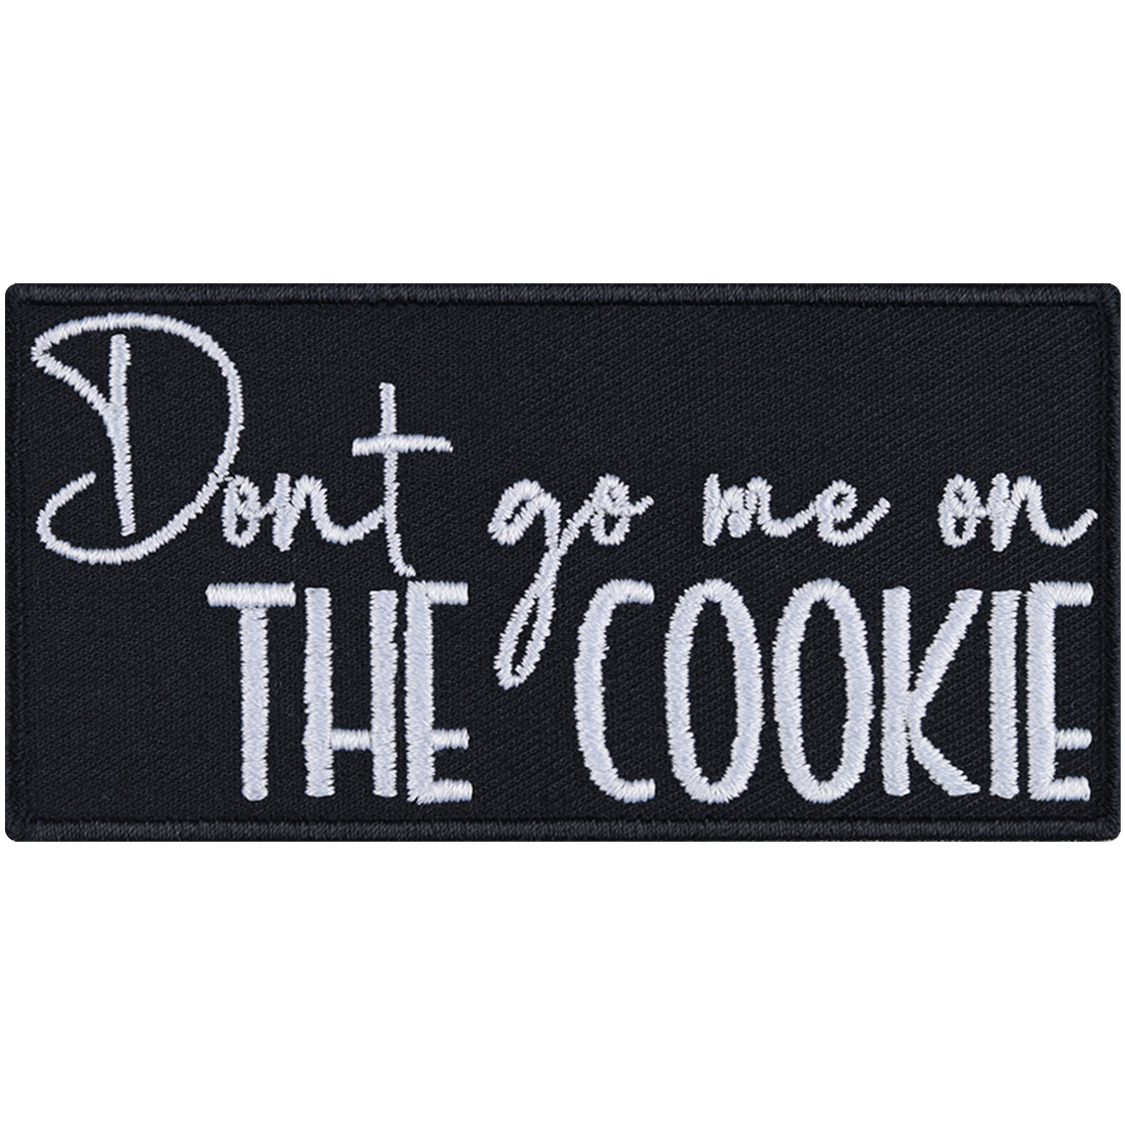 Don't go me on the cookie - Patch